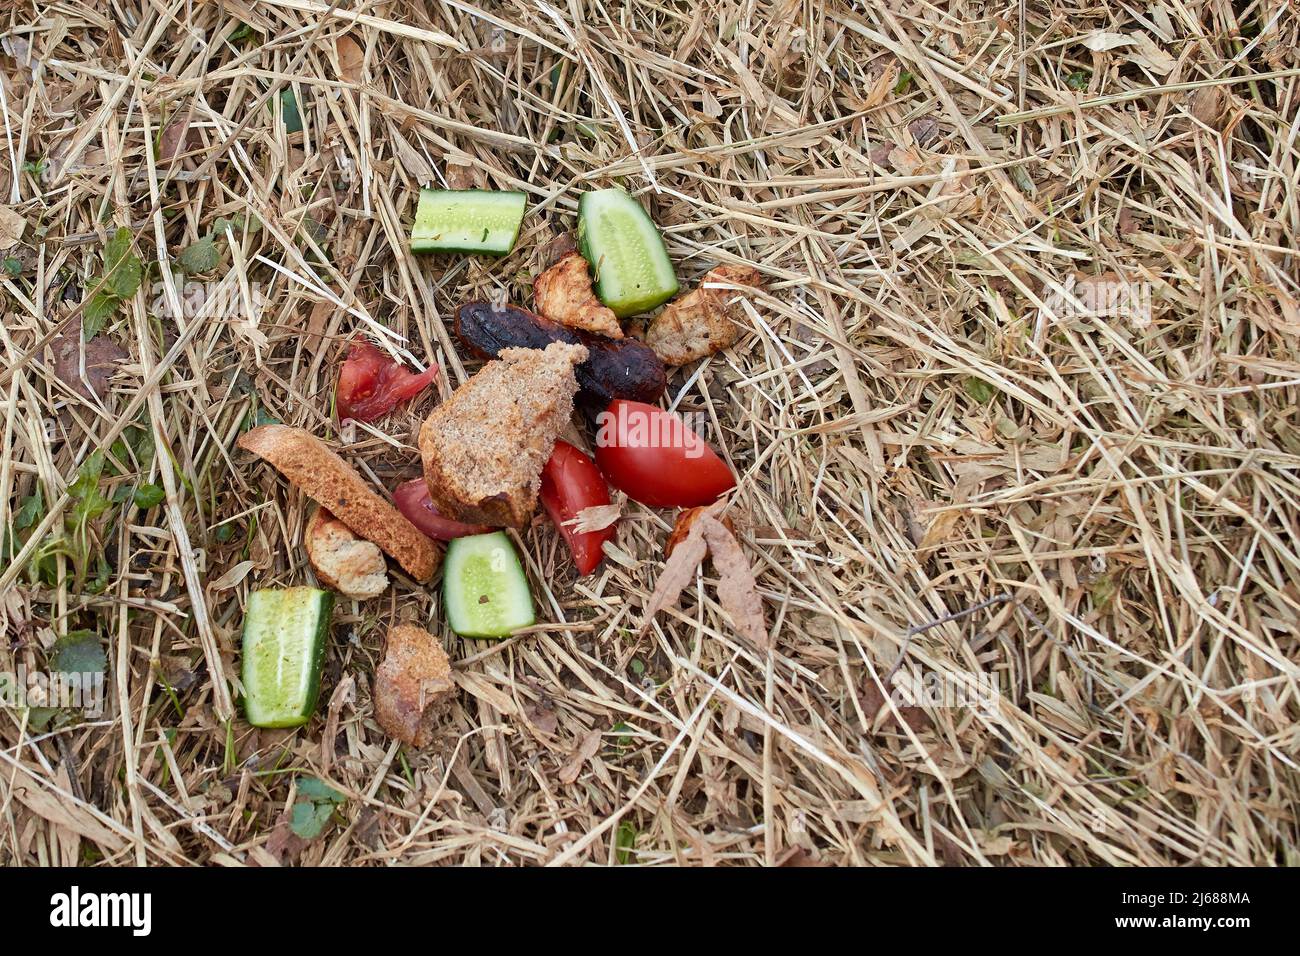 Half-eaten pieces of vegetables and rye bread lie on the dry grass Stock Photo